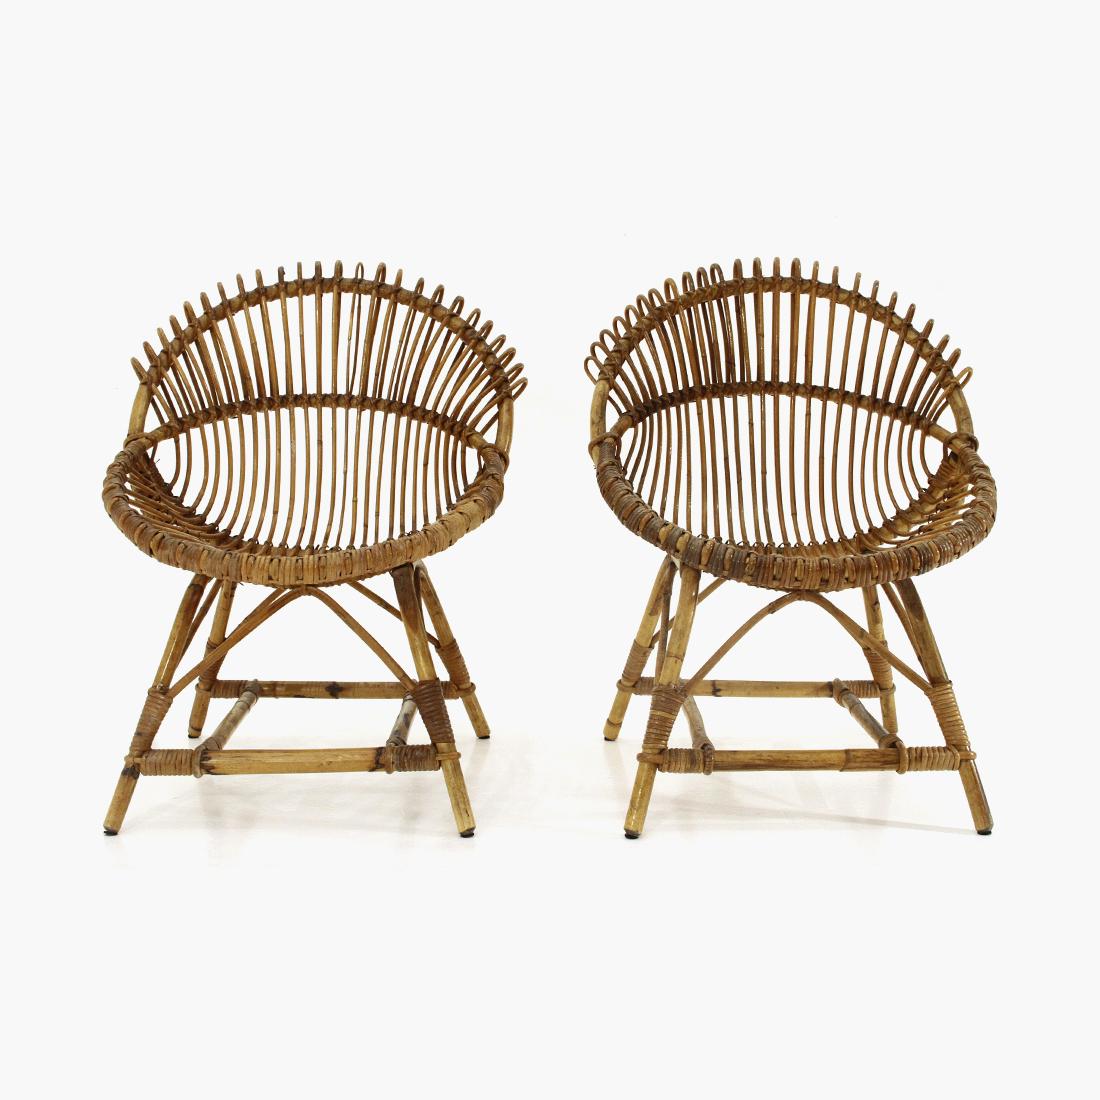 Italian Pair of Rattan Armchairs, 1950s For Sale